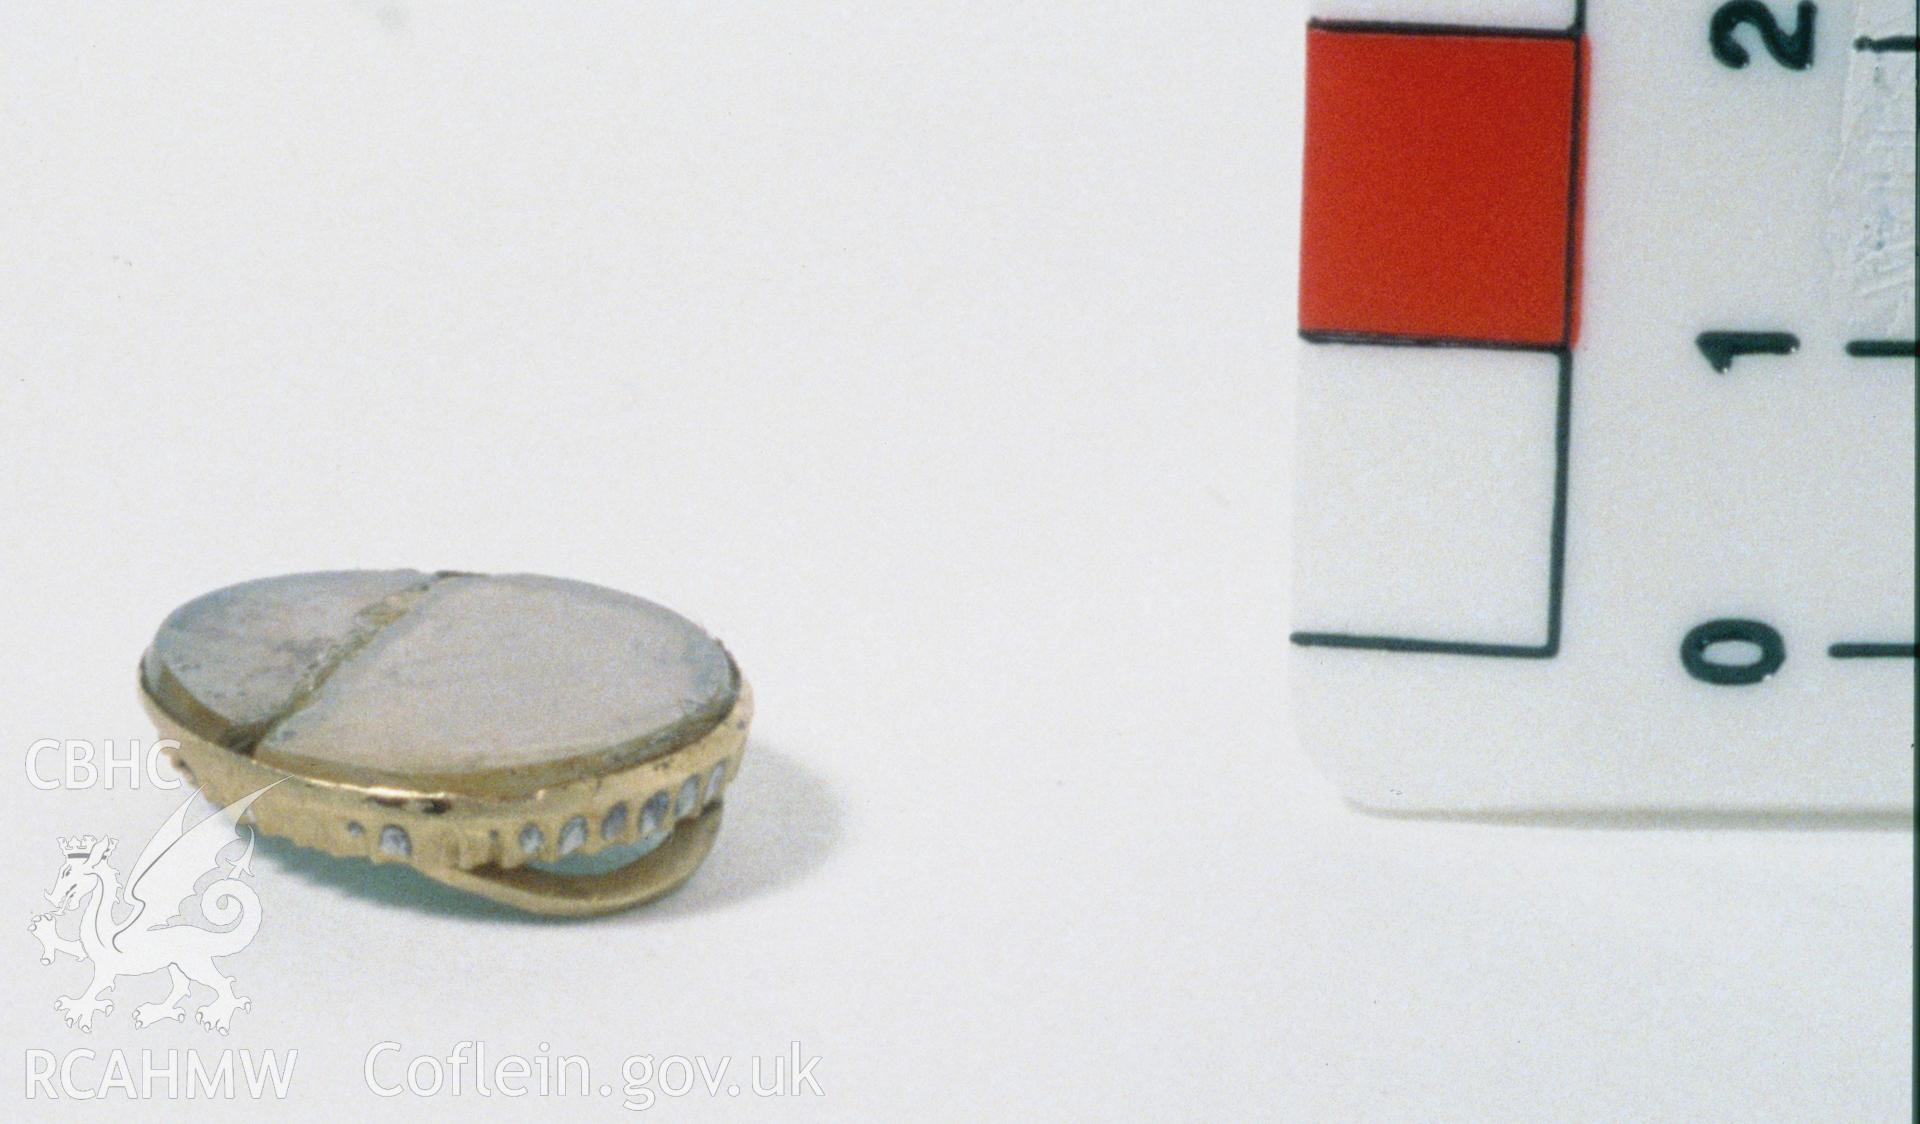 Colour slide showing find, a gold finger ring, from a survey of the Mary designated shipwreck, courtesy of National Museums, Liverpool (Merseyside Maritime Museum)